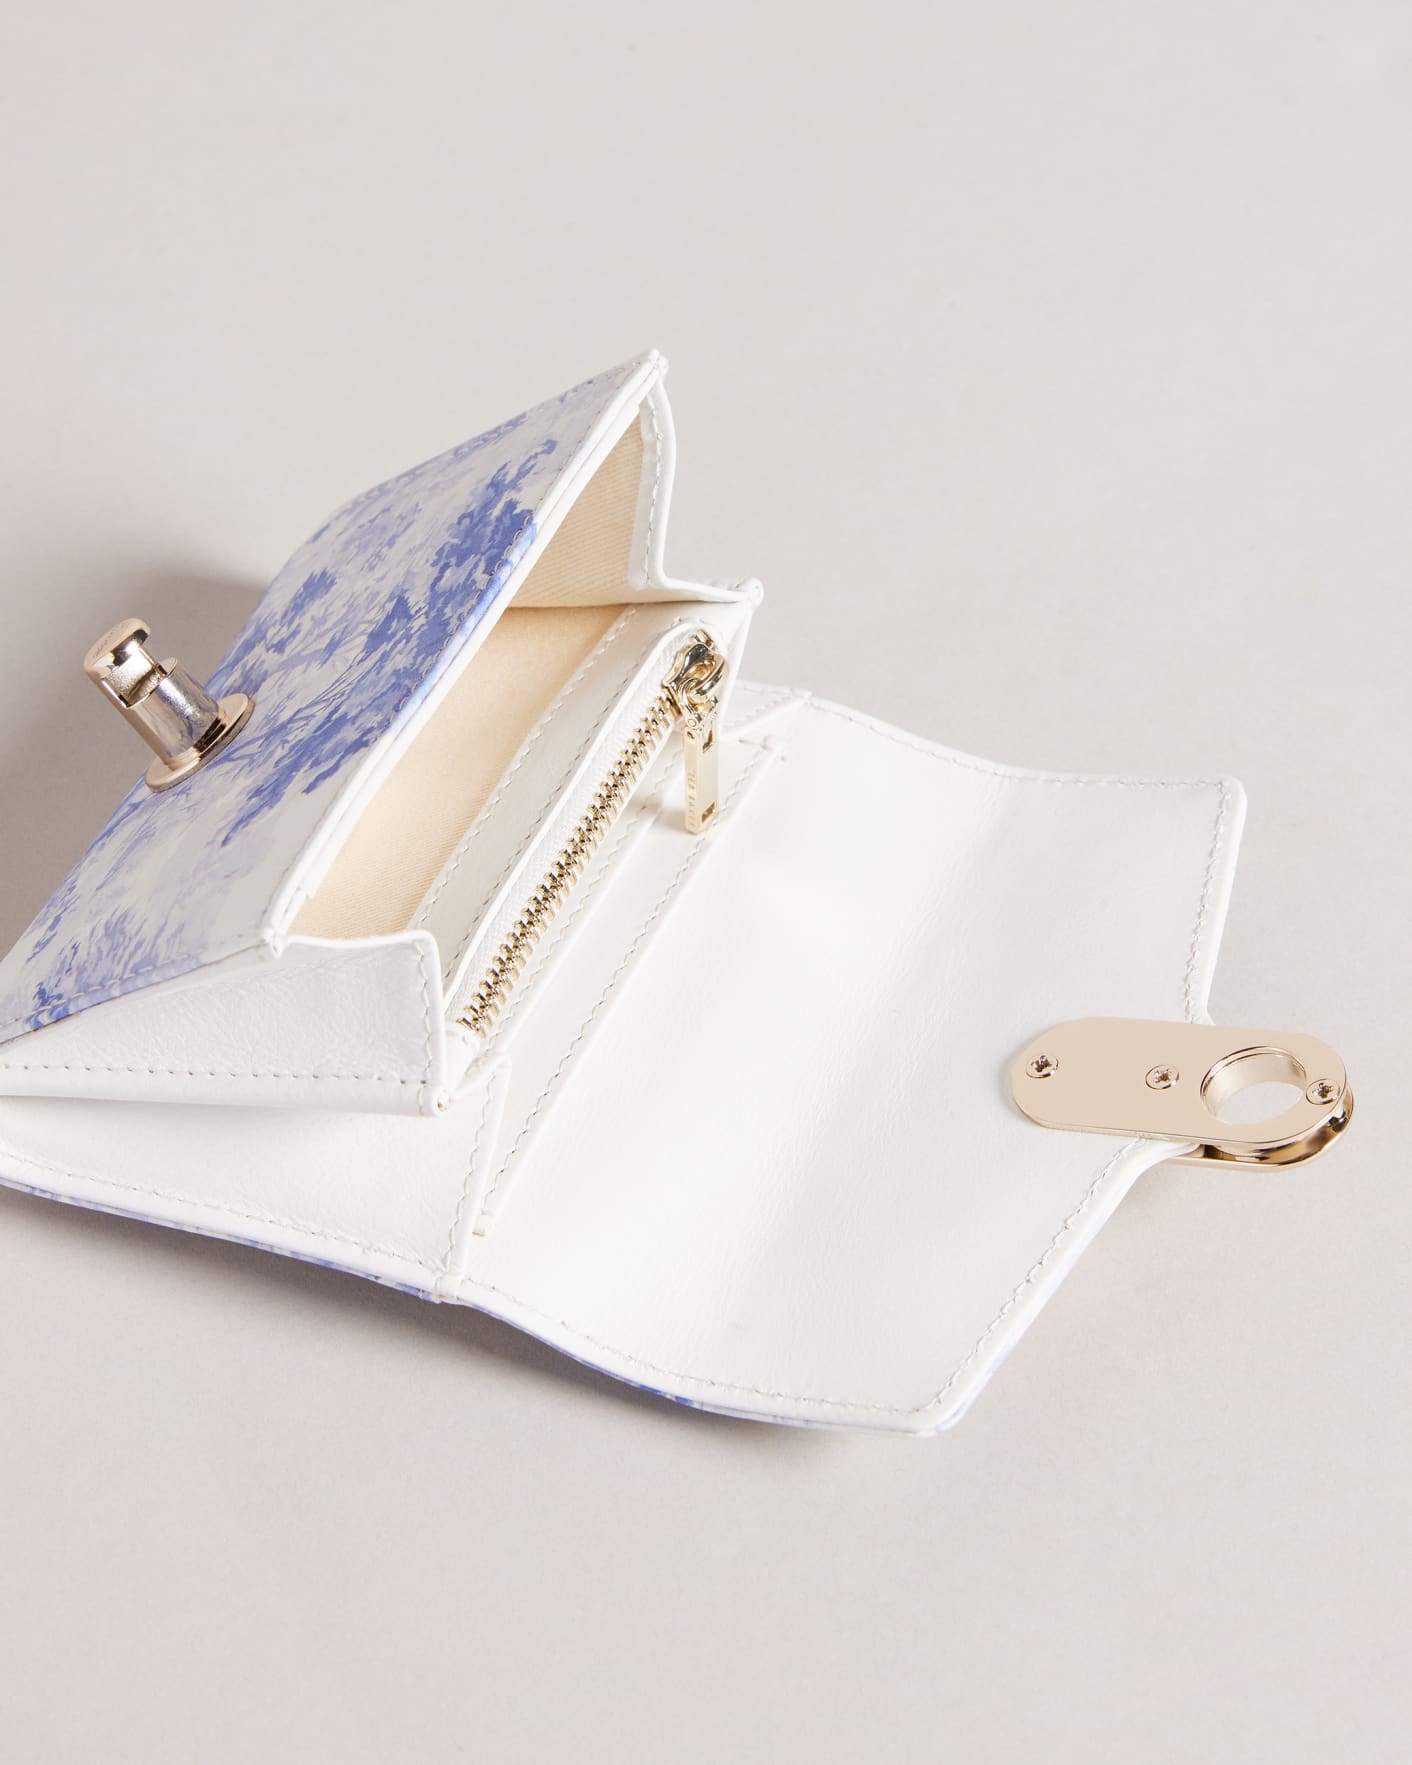 White New Romantic Landscape Small Purse Ted Baker